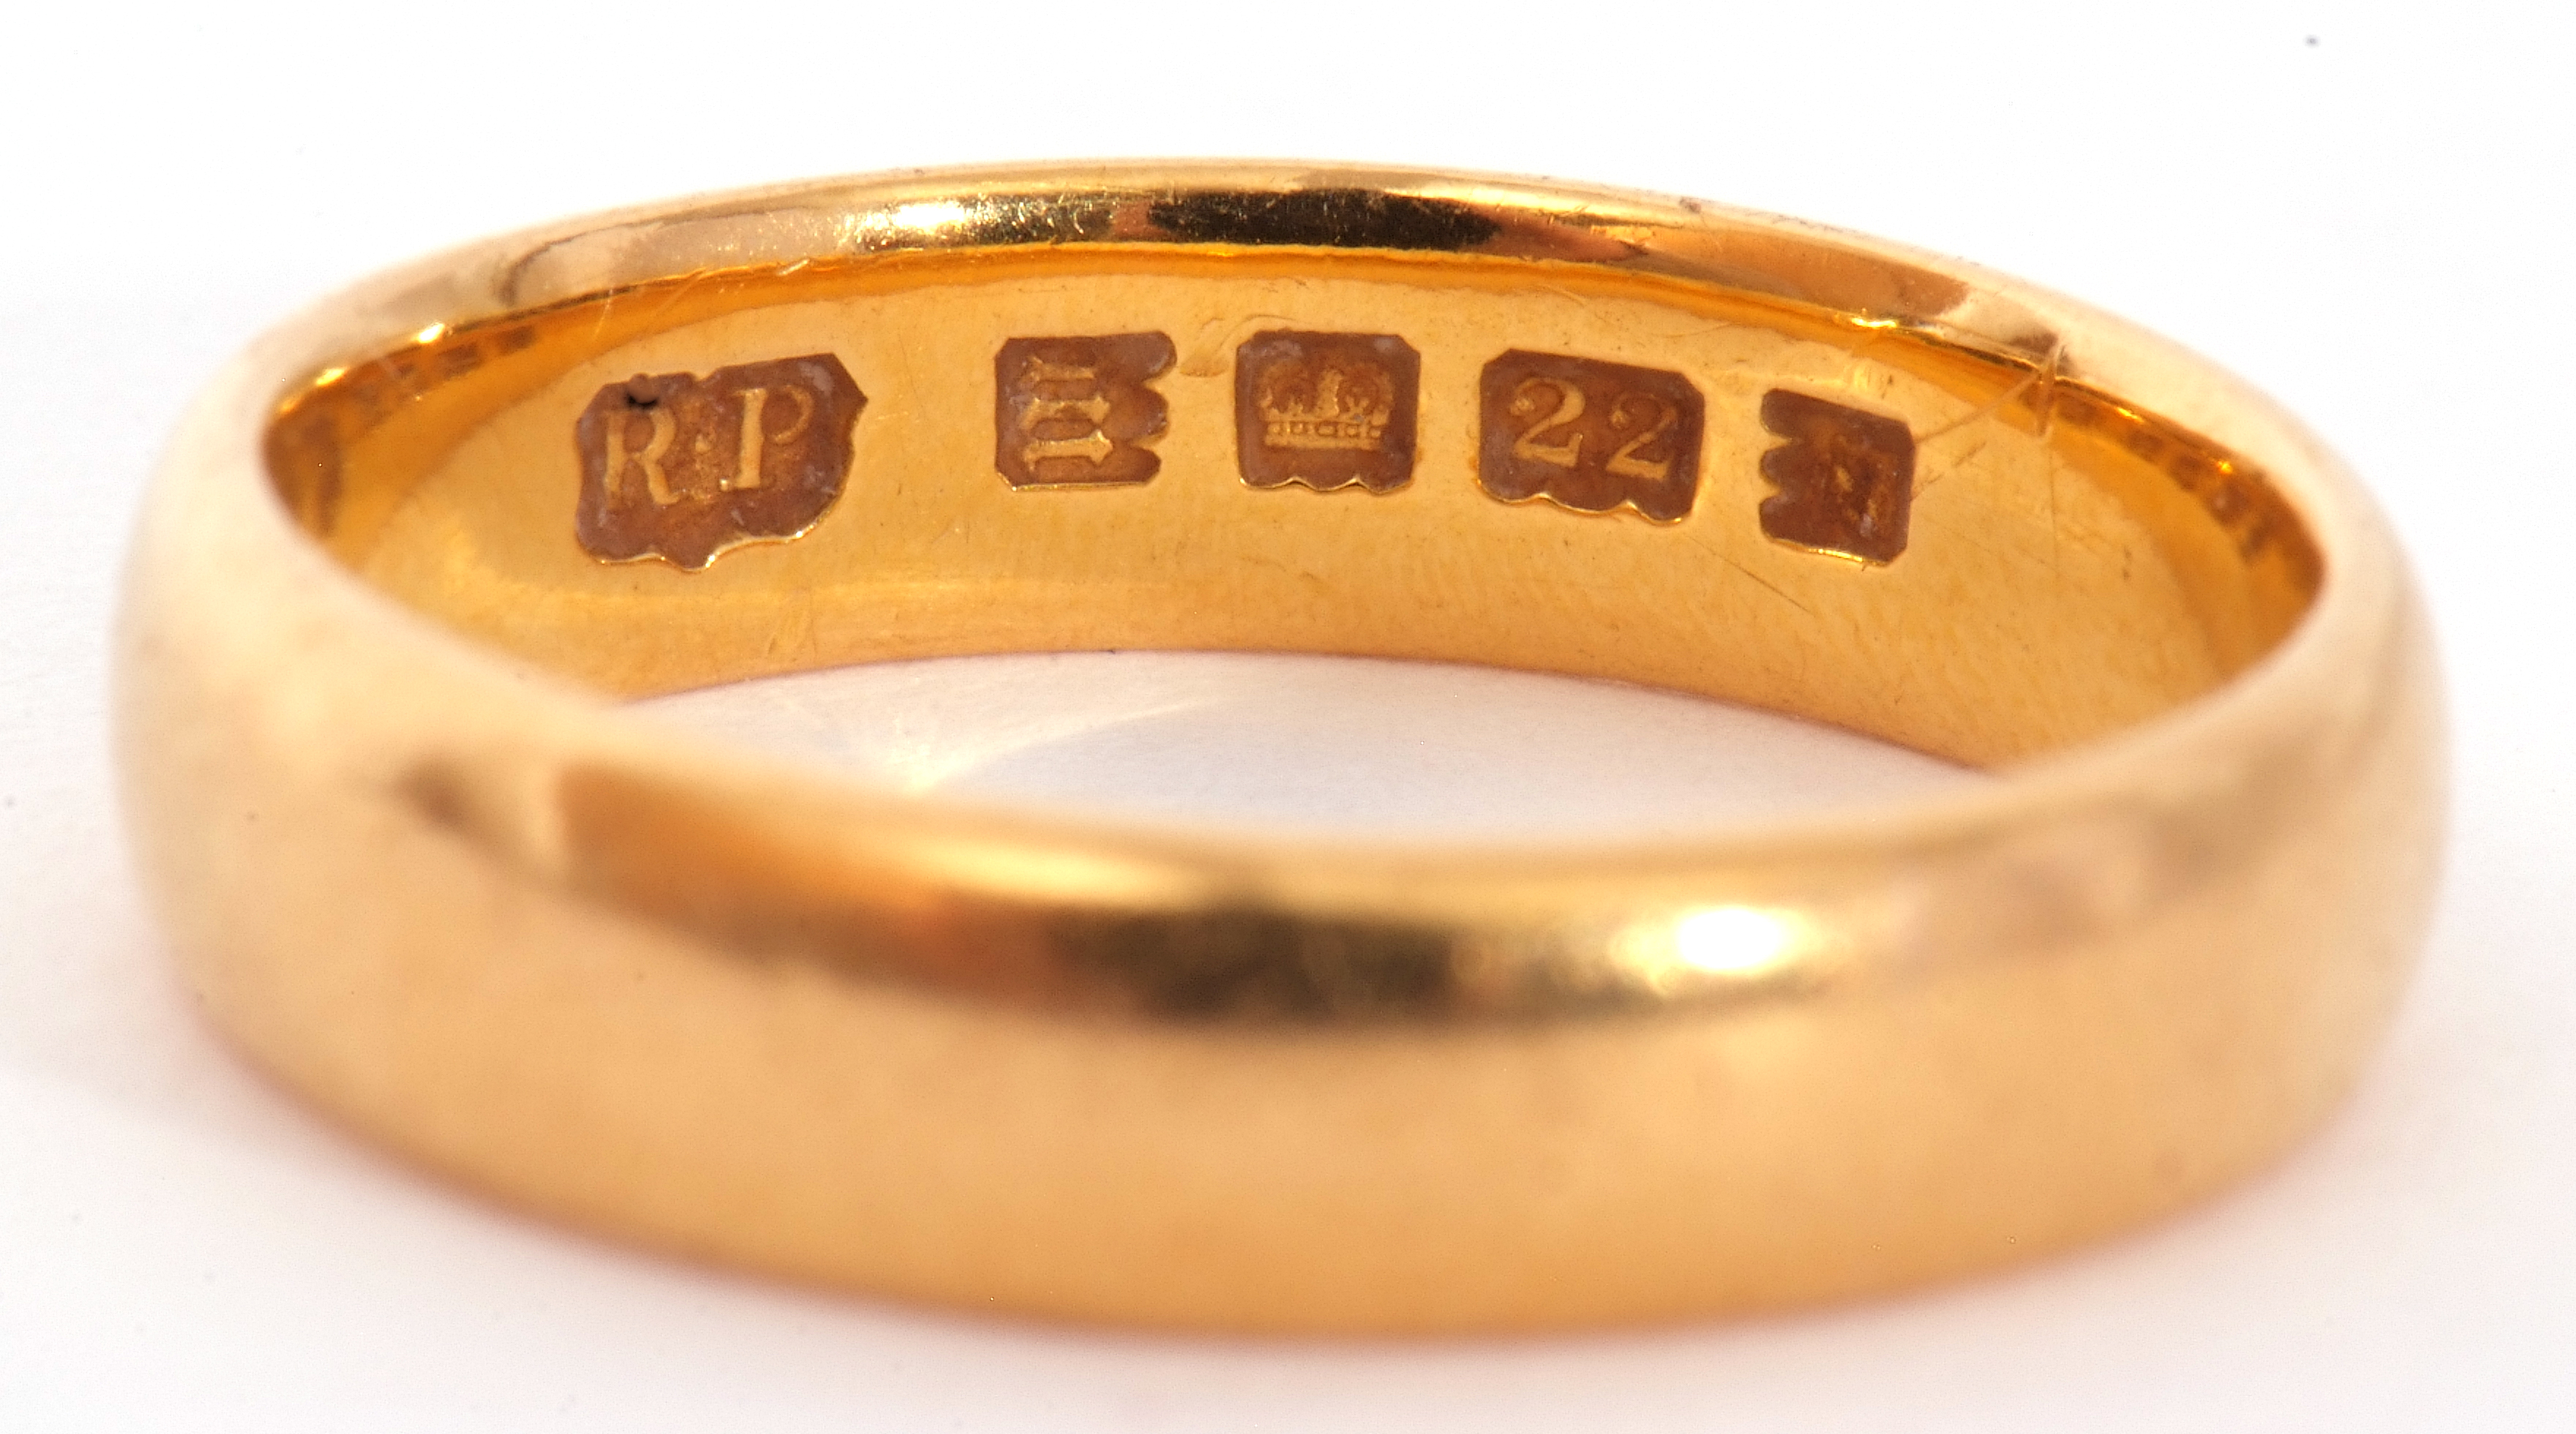 Early 20th century 22ct gold wedding ring, plain polished design, 6.7gms, London 1927, size P - Image 3 of 3